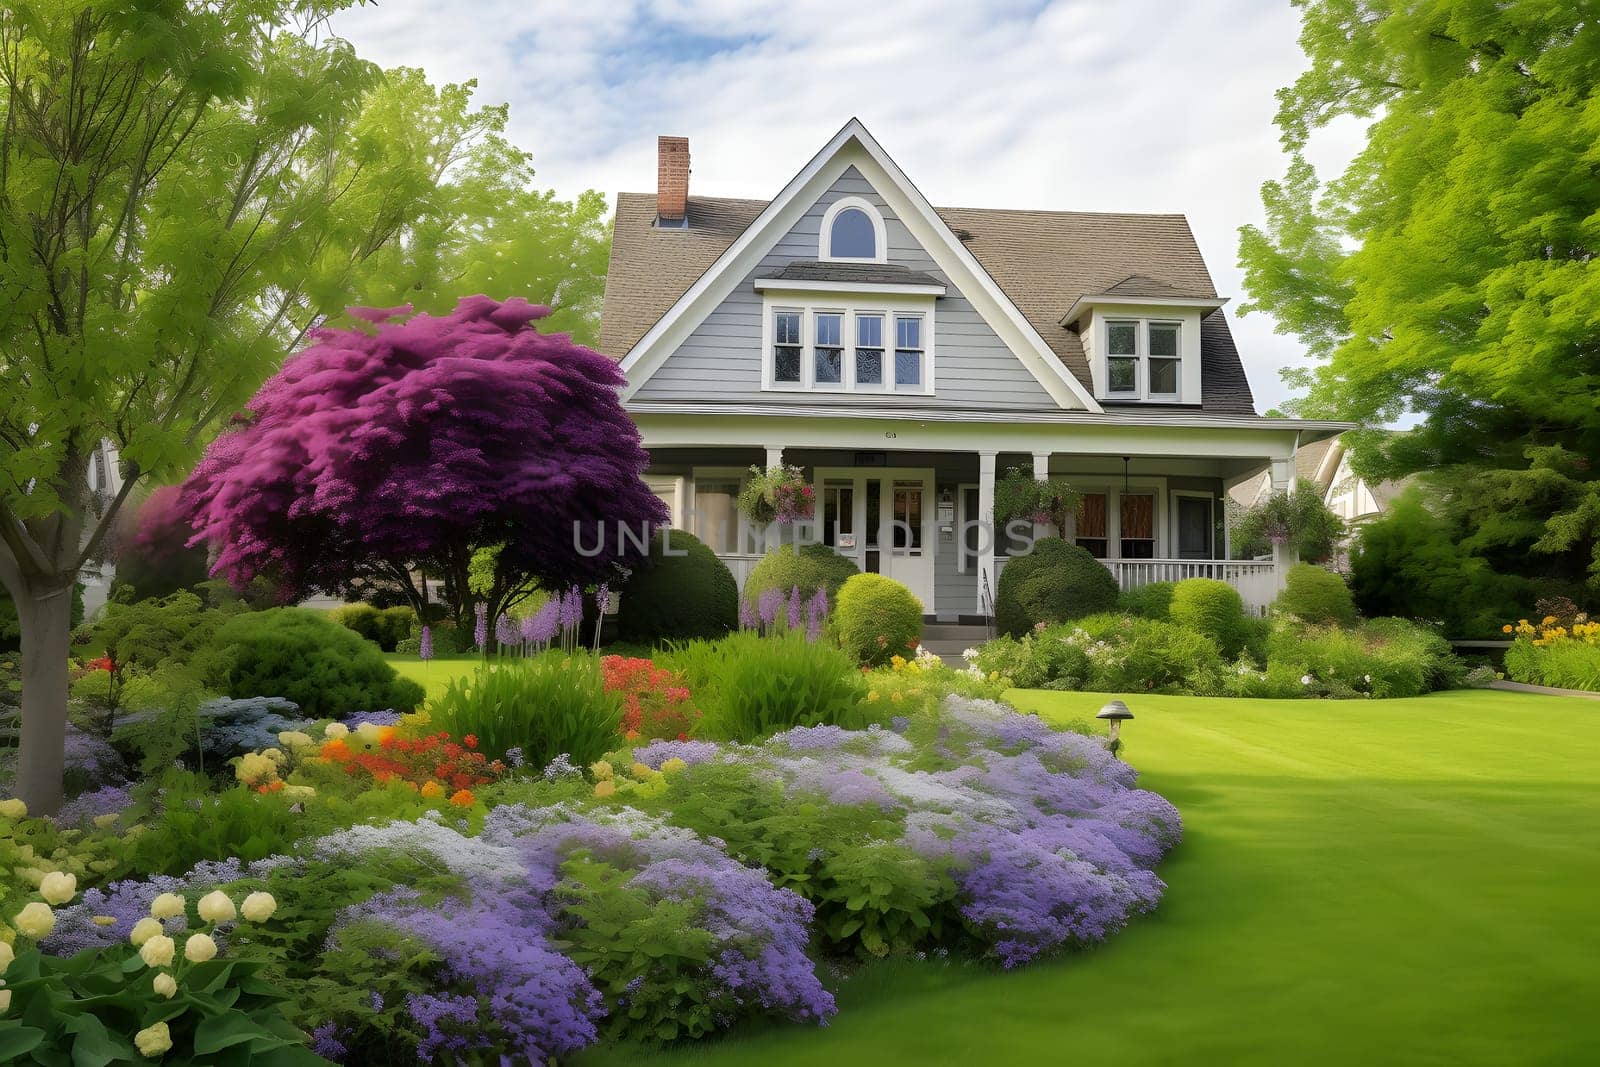 classic two-storey living house with flower garden at sunny summer day - american dream style. Neural network generated in may 2023. Not based on any actual scene.